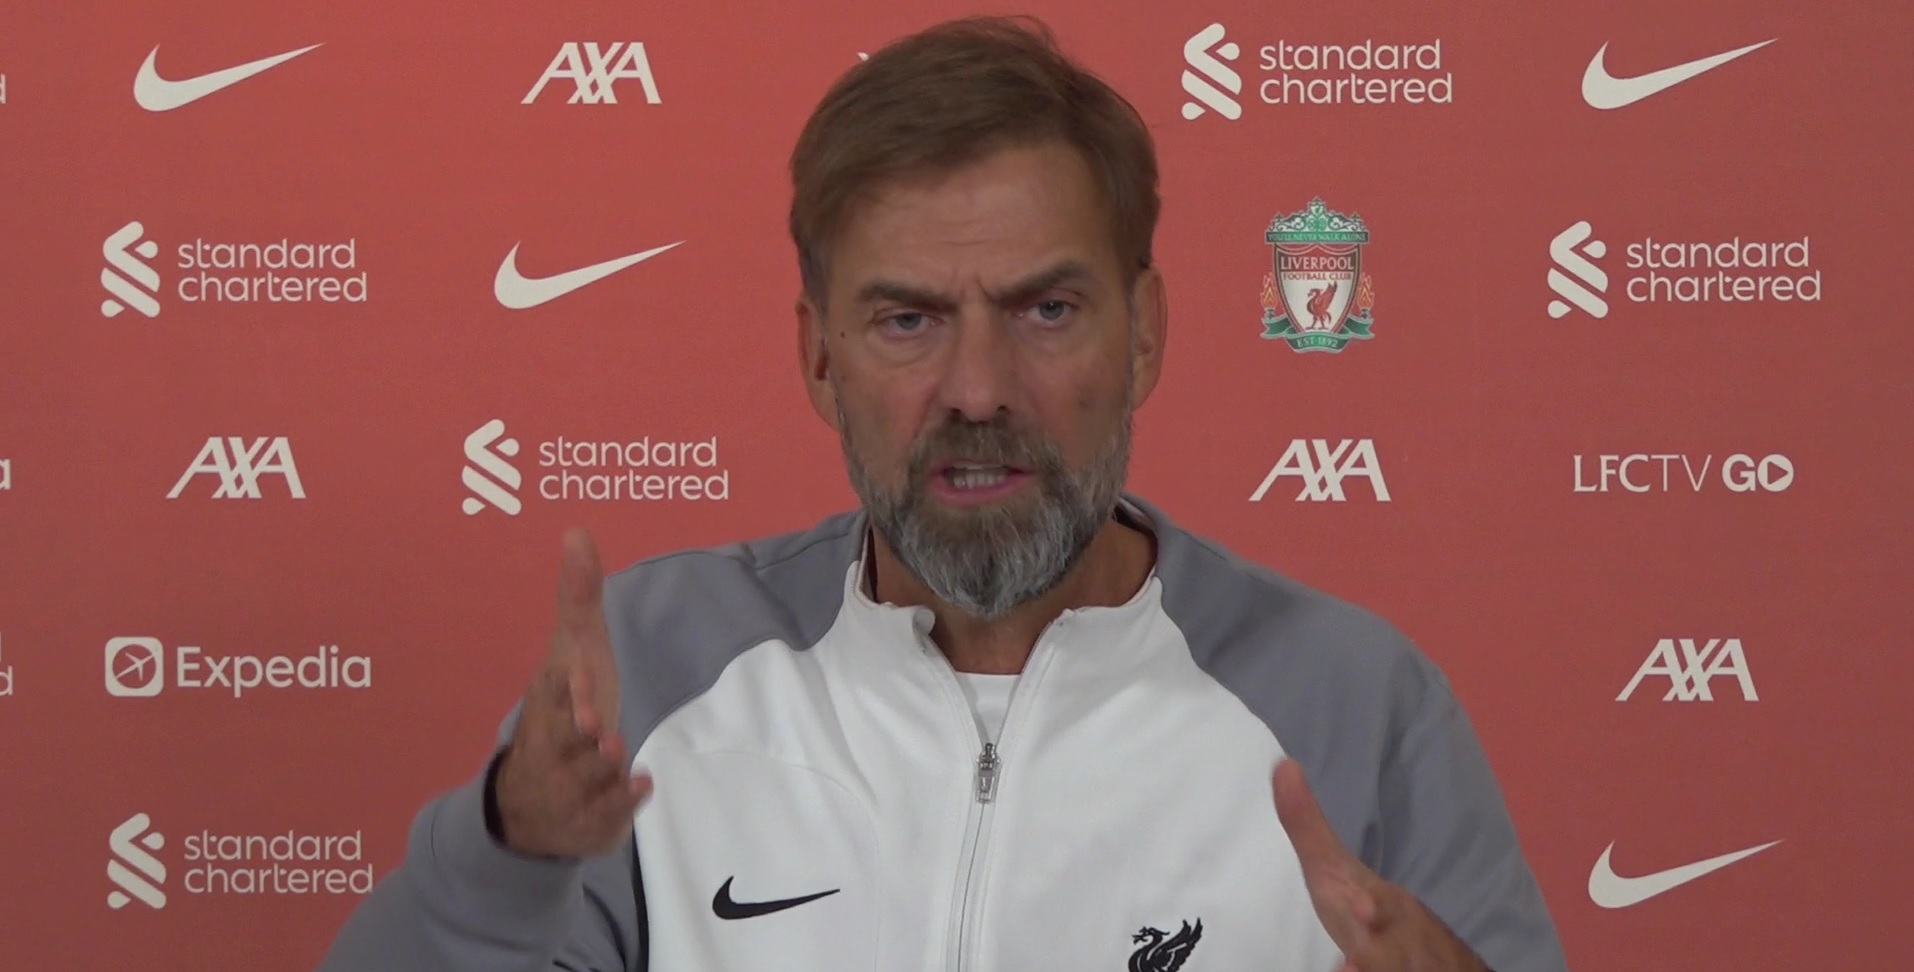 (Video) Klopp’s epic five-minute rant slamming journalists over Qatar inaction